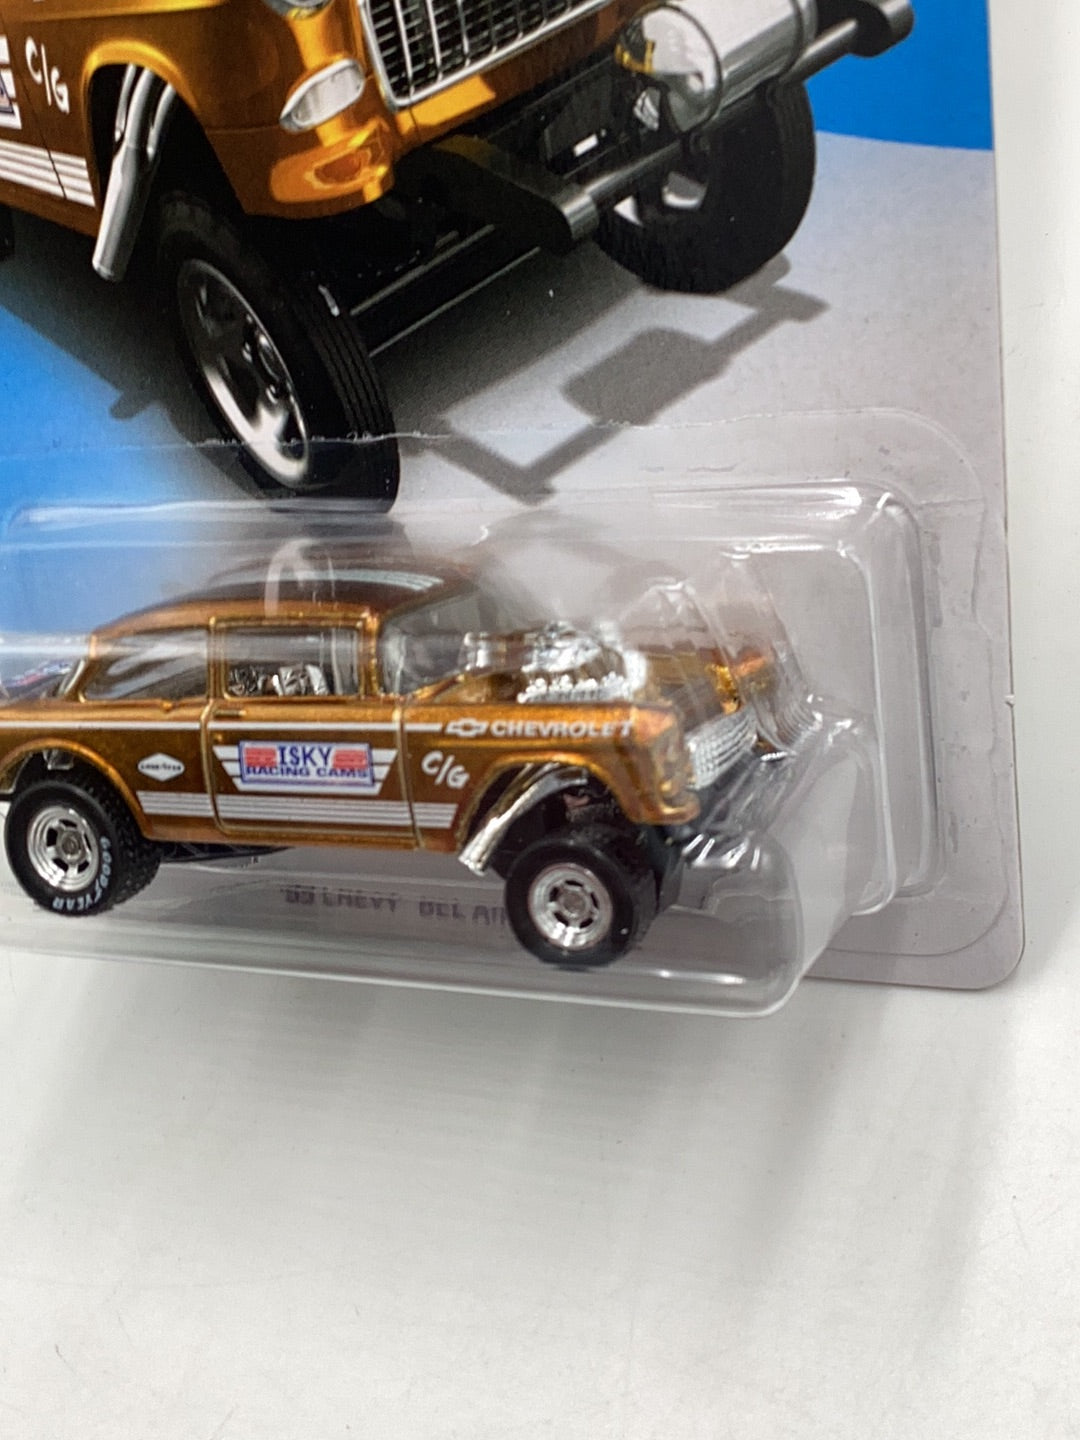 Hot Wheels Legends tour 55 Gasser real riders with protector